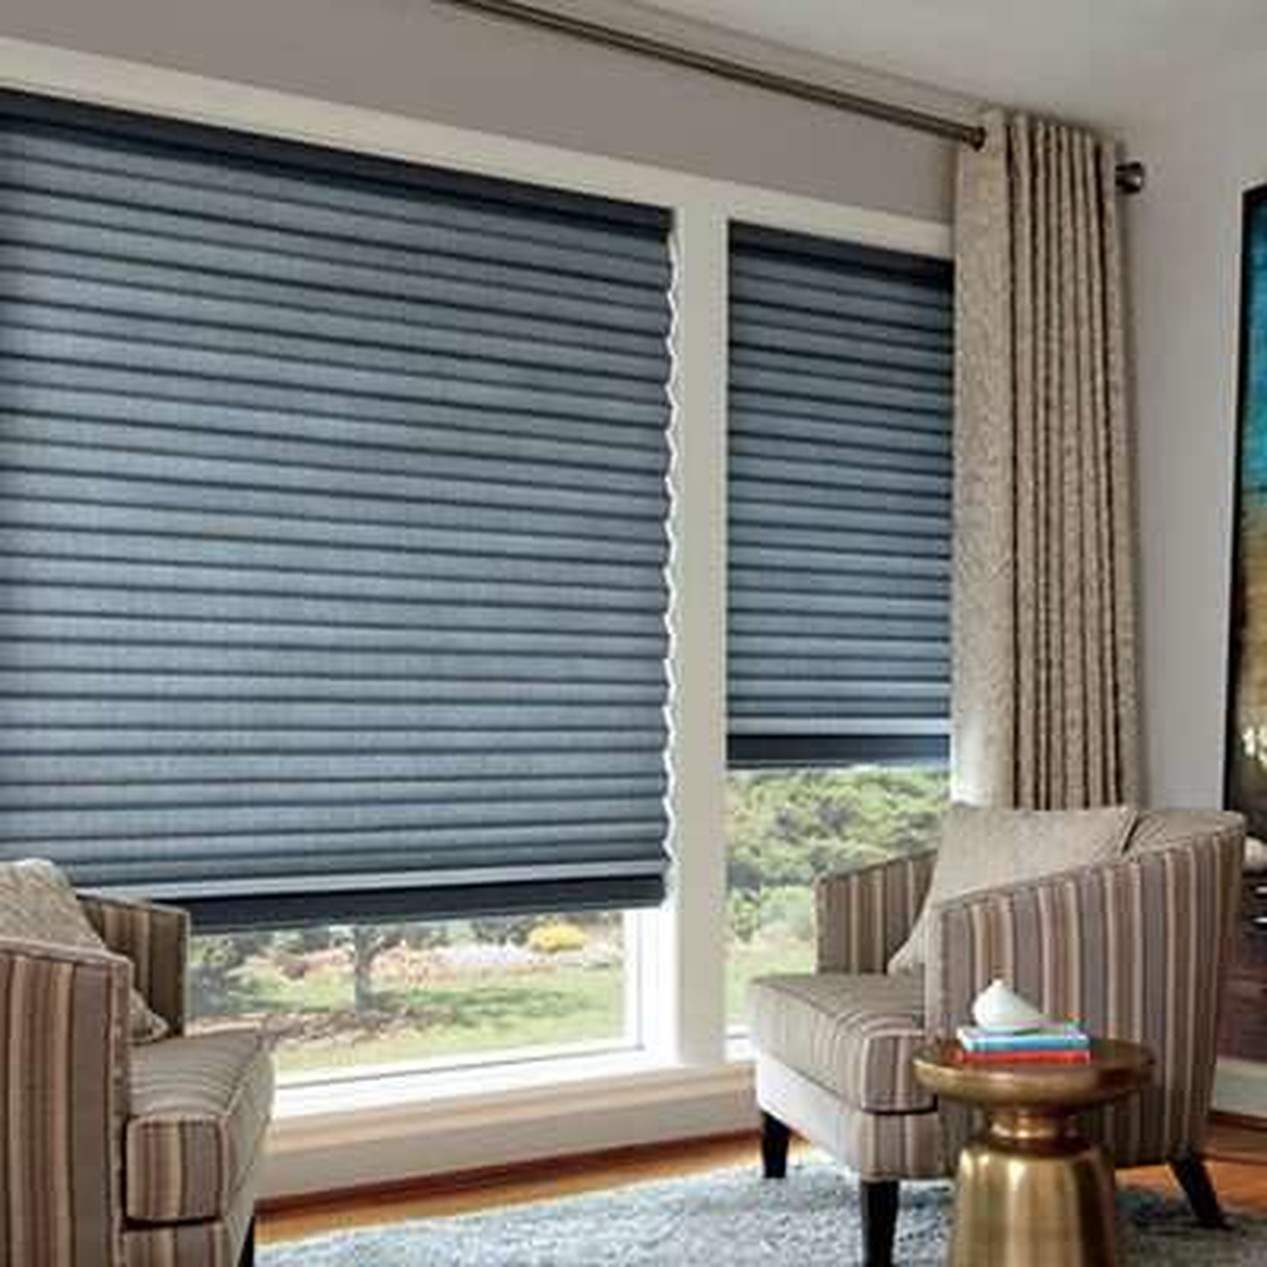 Blinds, Shades, Drapes and Shutters